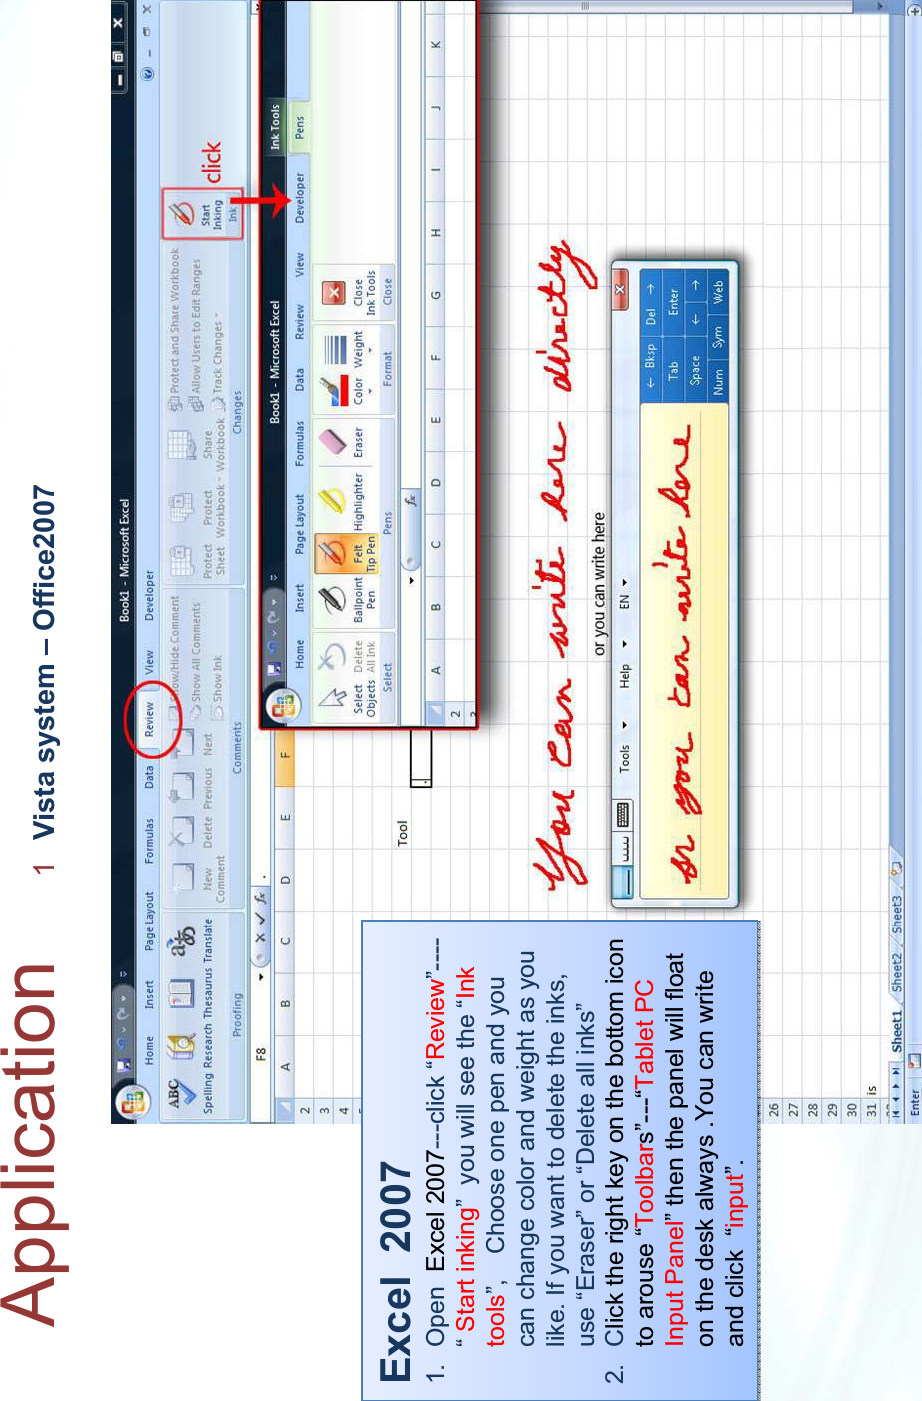 Application 1Vista system – Office2007Excel  20071. Open  Excel 2007---click “Review”----“ Start inking” you will see the “Ink tools”, Choose one pen and you can change color and weight as you like. If you want to delete the inks, use “Eraser” or “Delete all inks”2. Click the right key on the bottom icon  to arouse “Toolbars”---“Tablet PC Input Panel” then the panel will float on the desk always .You can write and click  “input”.Excel  20071. Open  Excel 2007---click “Review”----“Start inking” you will see the “Ink tools”, Choose one pen and you can change color and weight as you like. If you want to delete the inks, use “Eraser” or “Delete all inks”2. Click the right key on the bottom icon  to arouse “Toolbars”---“Tablet PC Input Panel” then the panel will float on the desk always .You can write and click  “input”.